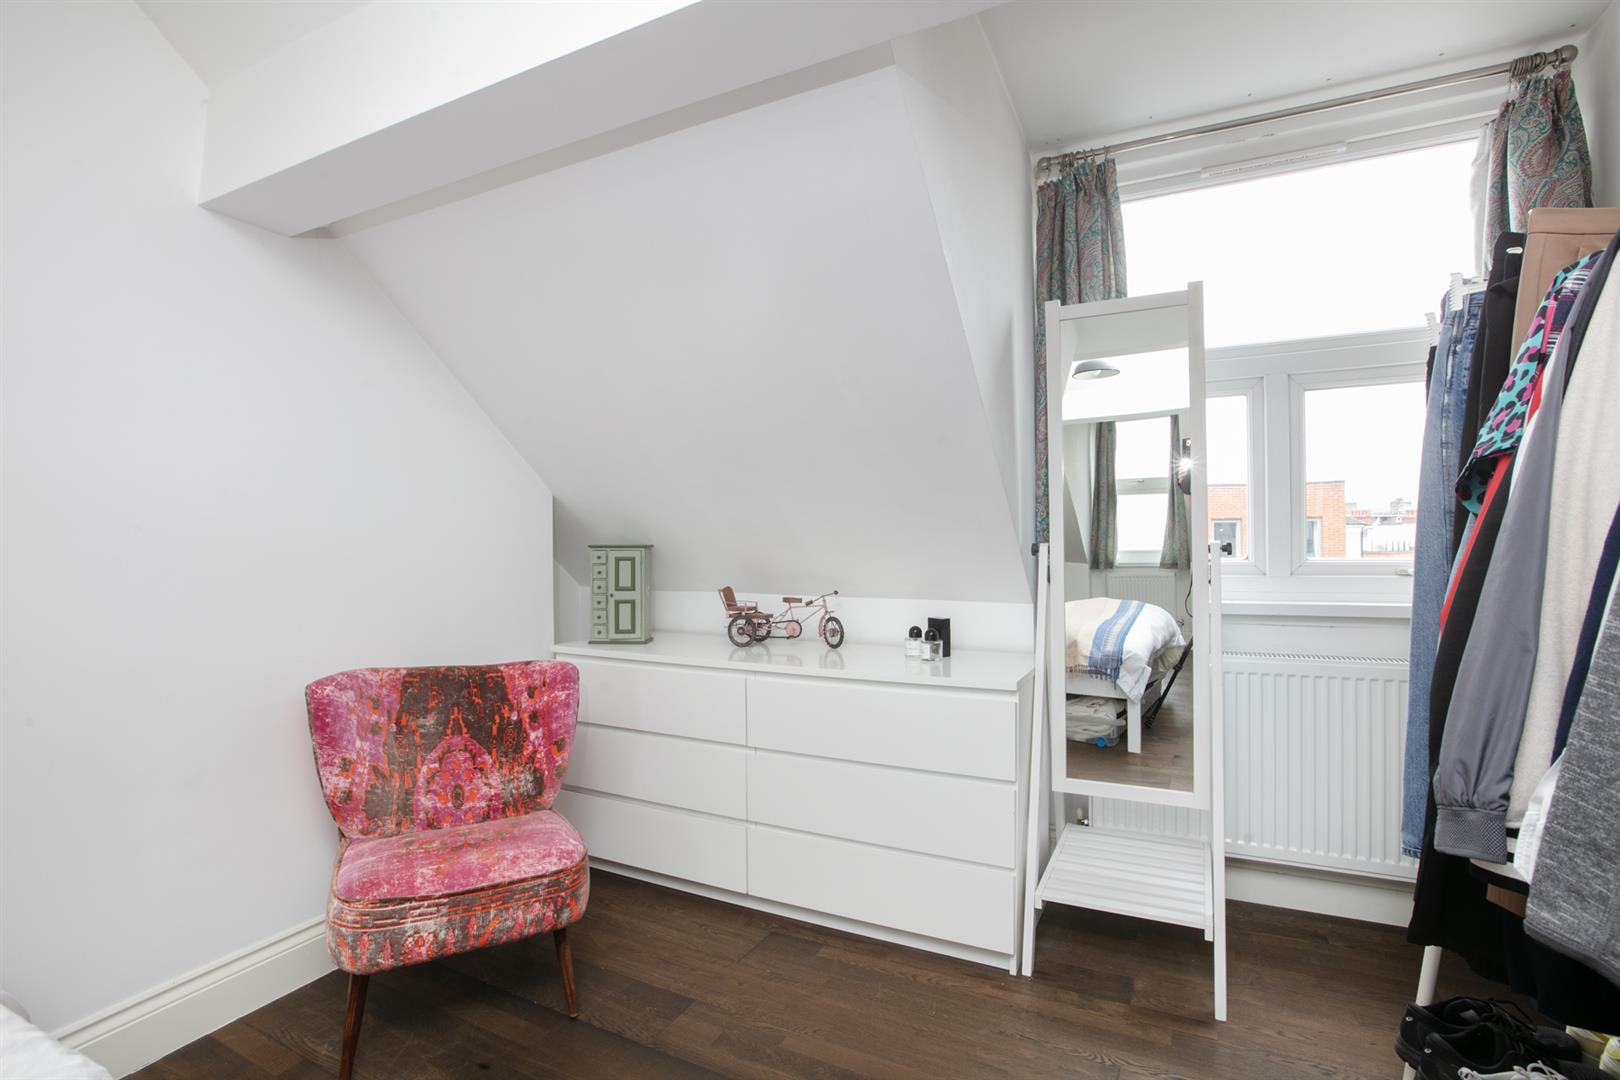 Flat - Conversion For Sale in Coldharbour Lane, Camberwell, SE5 1178 view13